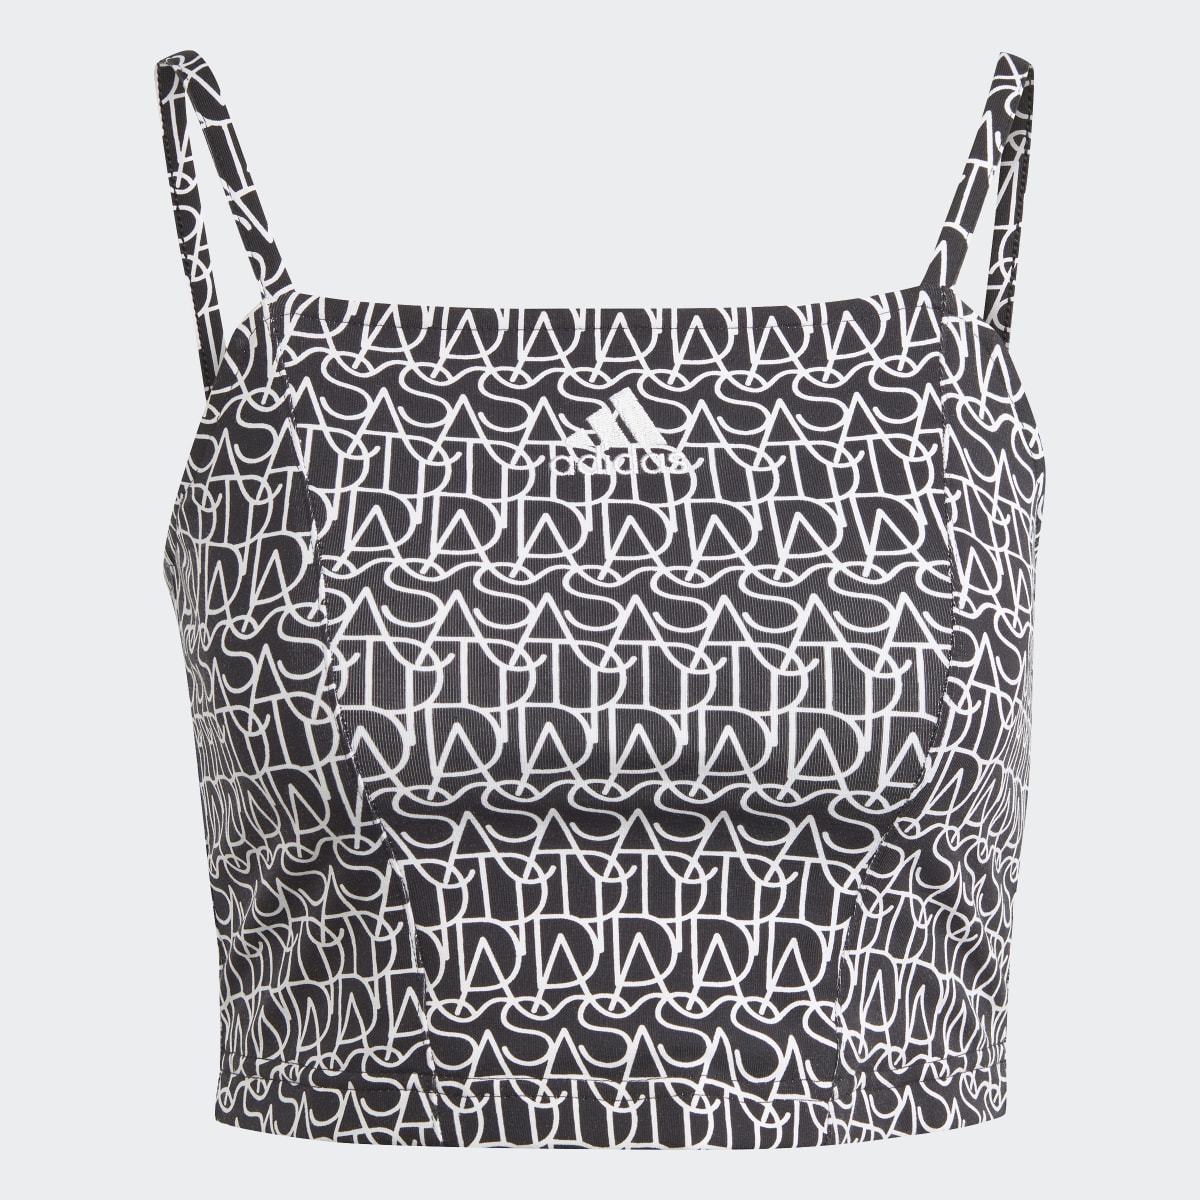 Adidas Allover adidas Graphic Corset-Inspired Atlet. 6